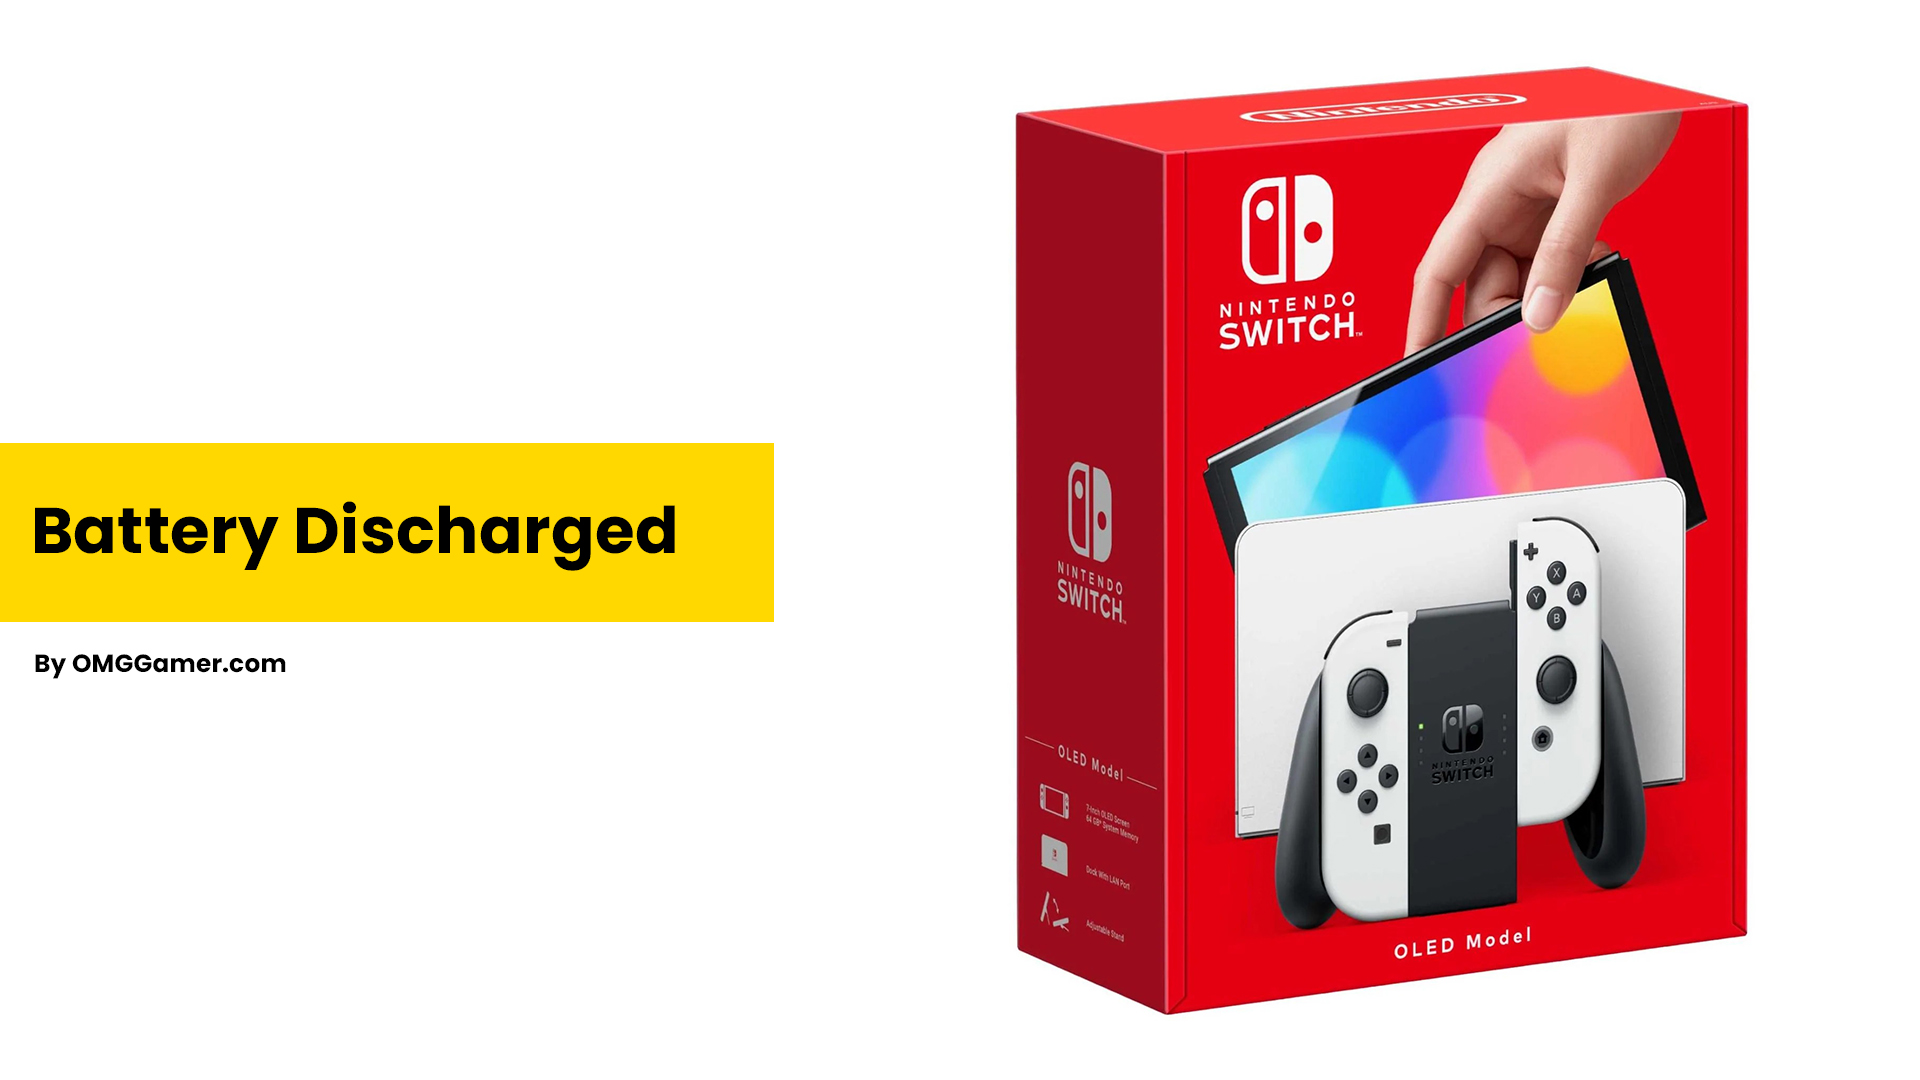 Battery Discharged: Nintendo Switch Not Turning on